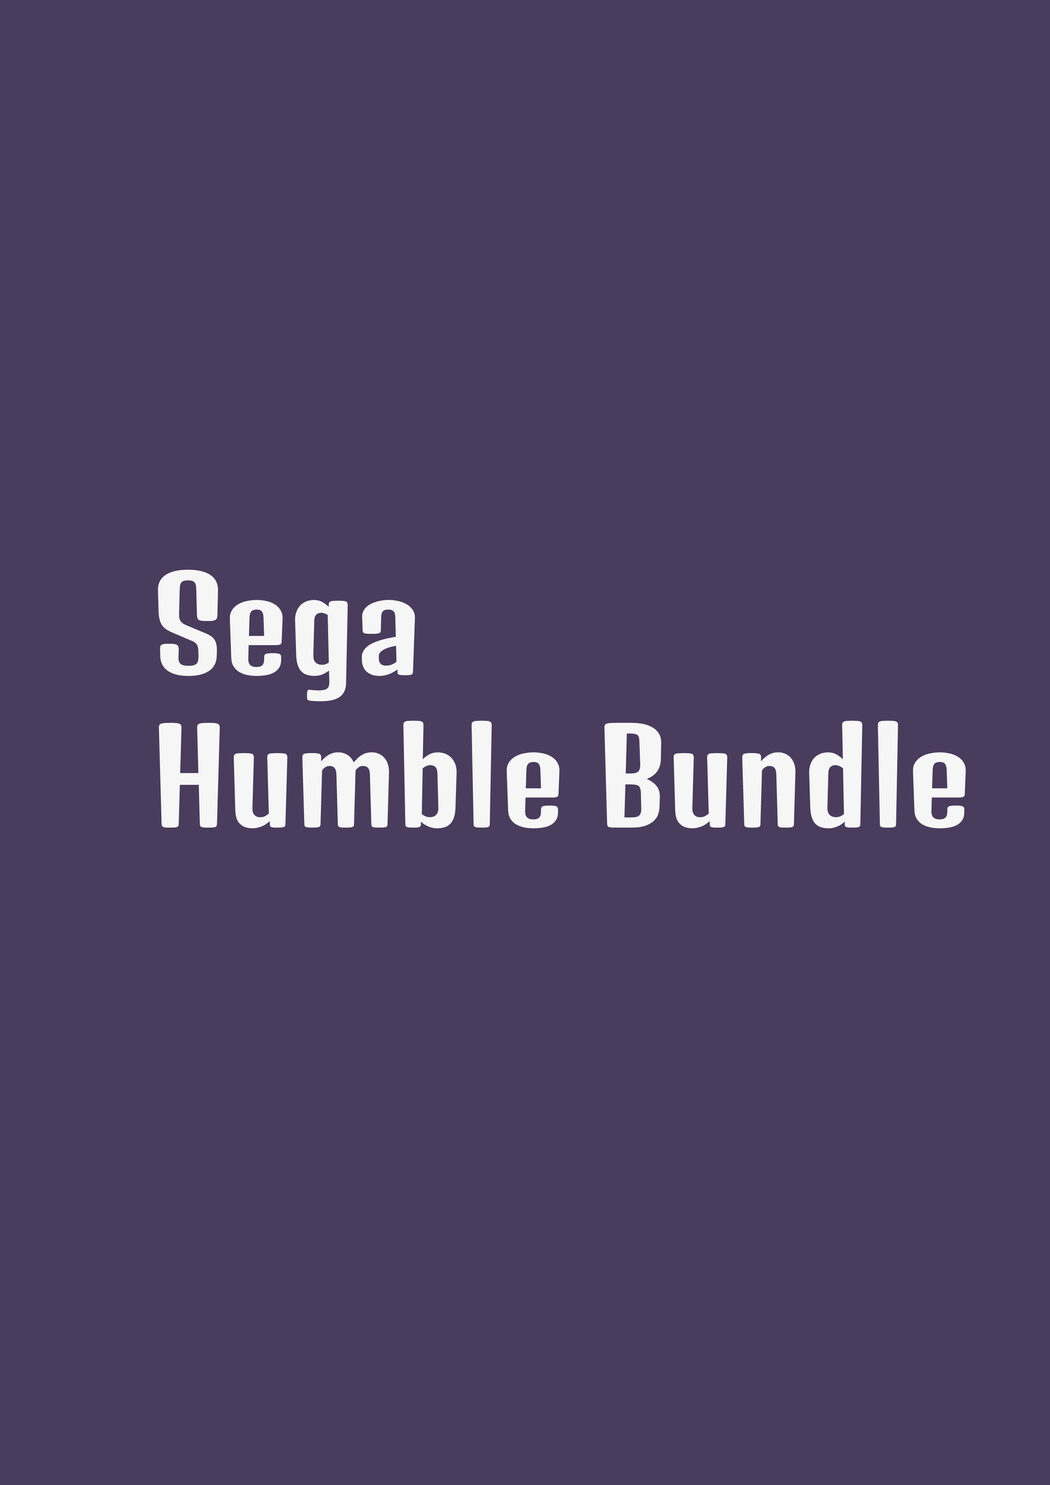 How to Buy a Humble Bundle and Redeem It on Steam